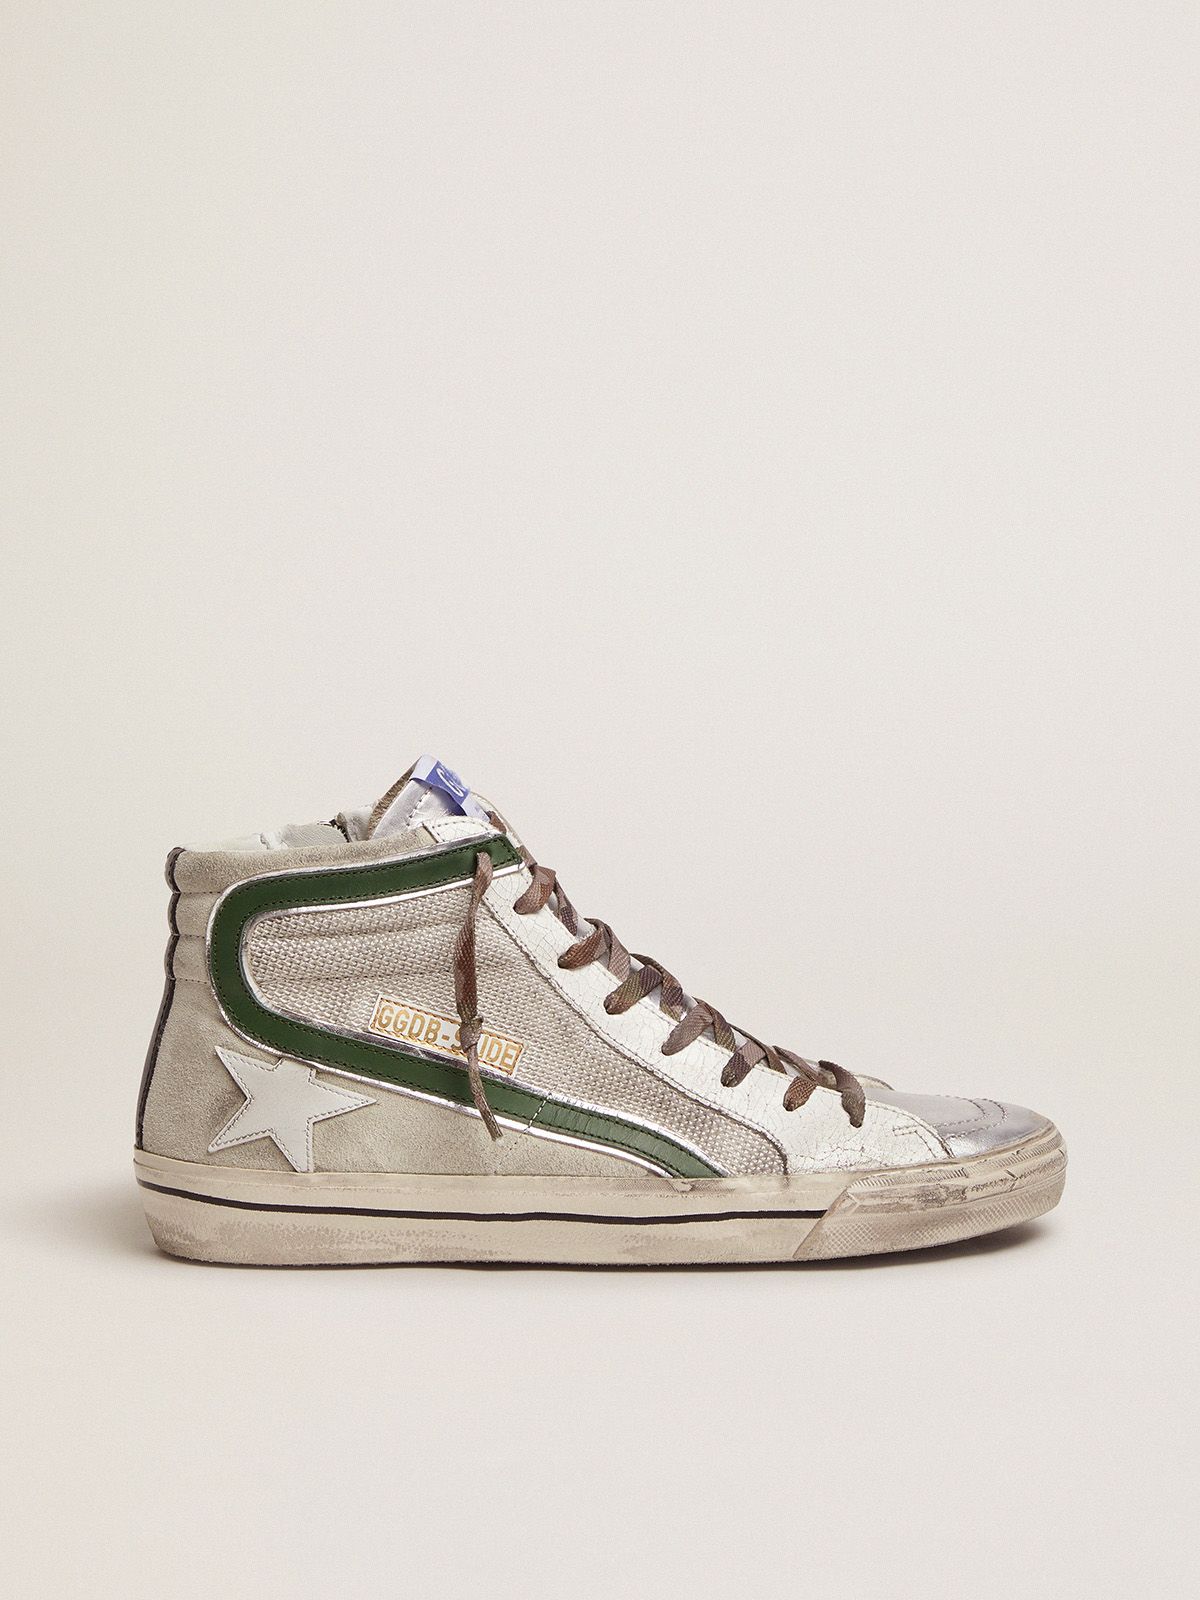 Golden Goose Donna Sneakers Slide LTD sneakers in leather and mesh with green flash